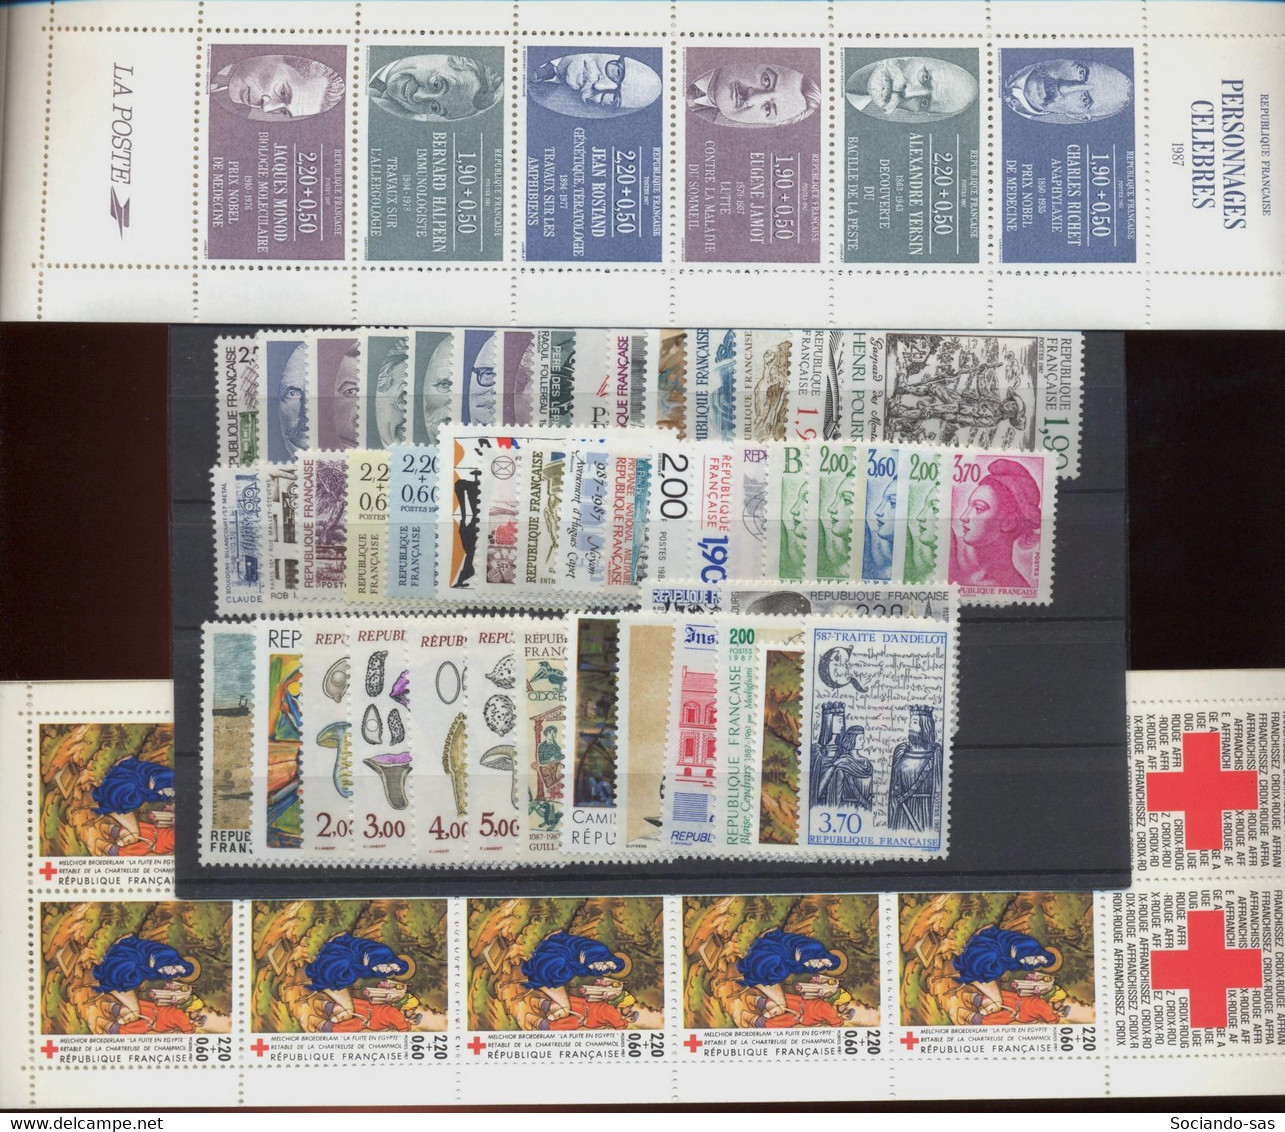 FRANCE - Année Complète 1987 + Carnets - N°Yv. 2452 à 2500 - Complet - Neuf Luxe ** / MNH / Postfrisch - 1980-1989